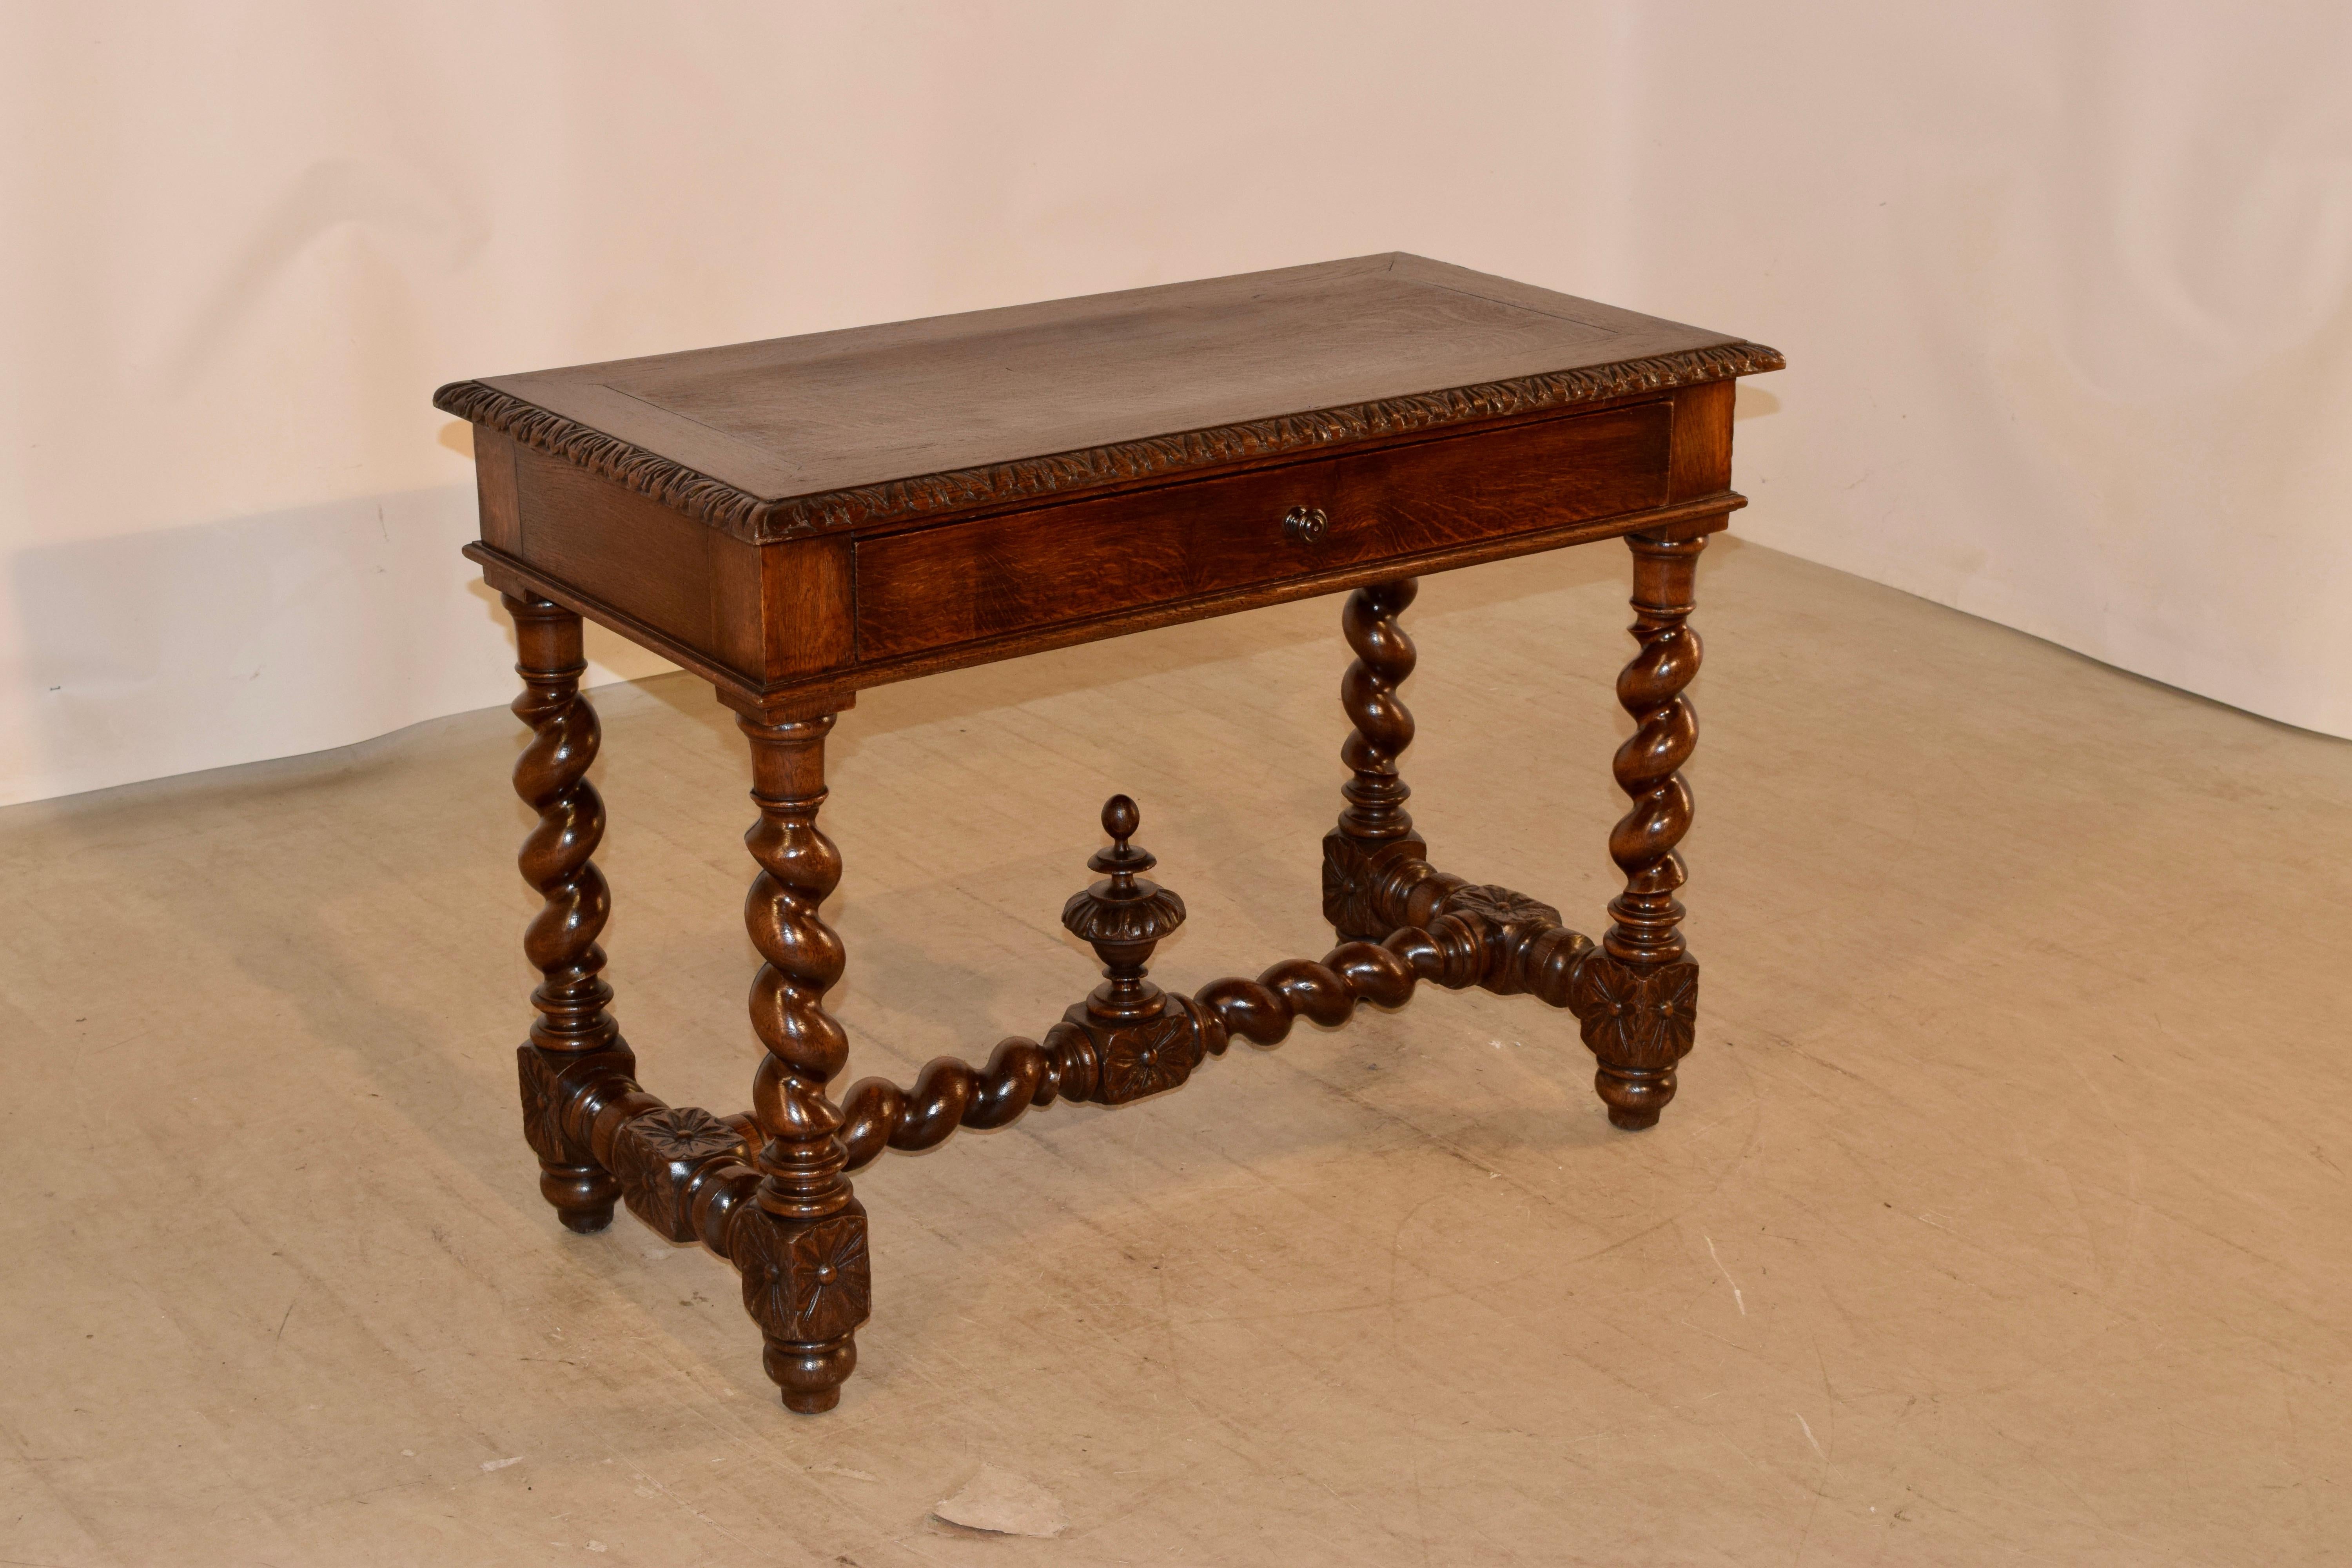 19th century French oak writing table with a banded edge around the top, surrounded by a hand carved decorated beveled edge. This follows down to a simple apron, containing a single drawer in the front, over hand turned barley twist legs, joined by